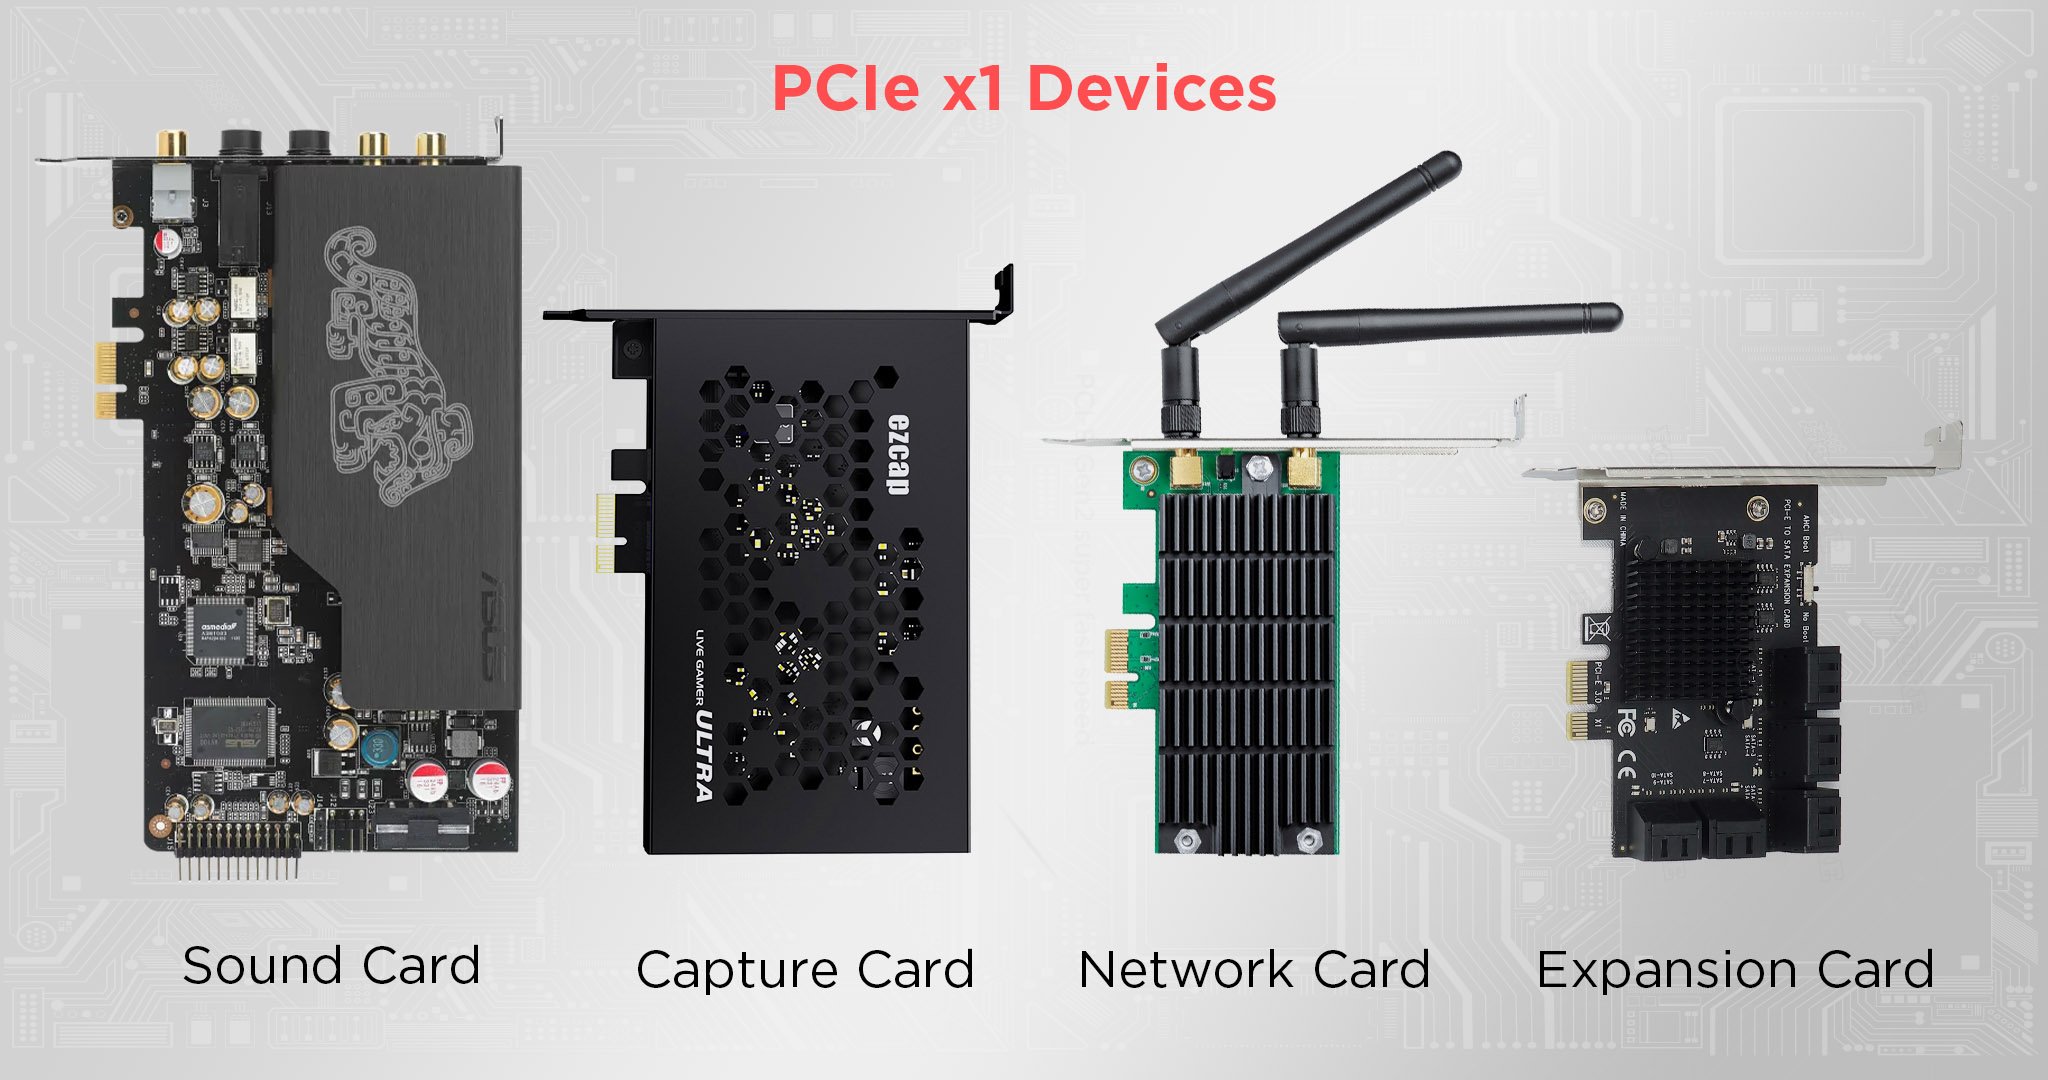 PCIe x1 Devices